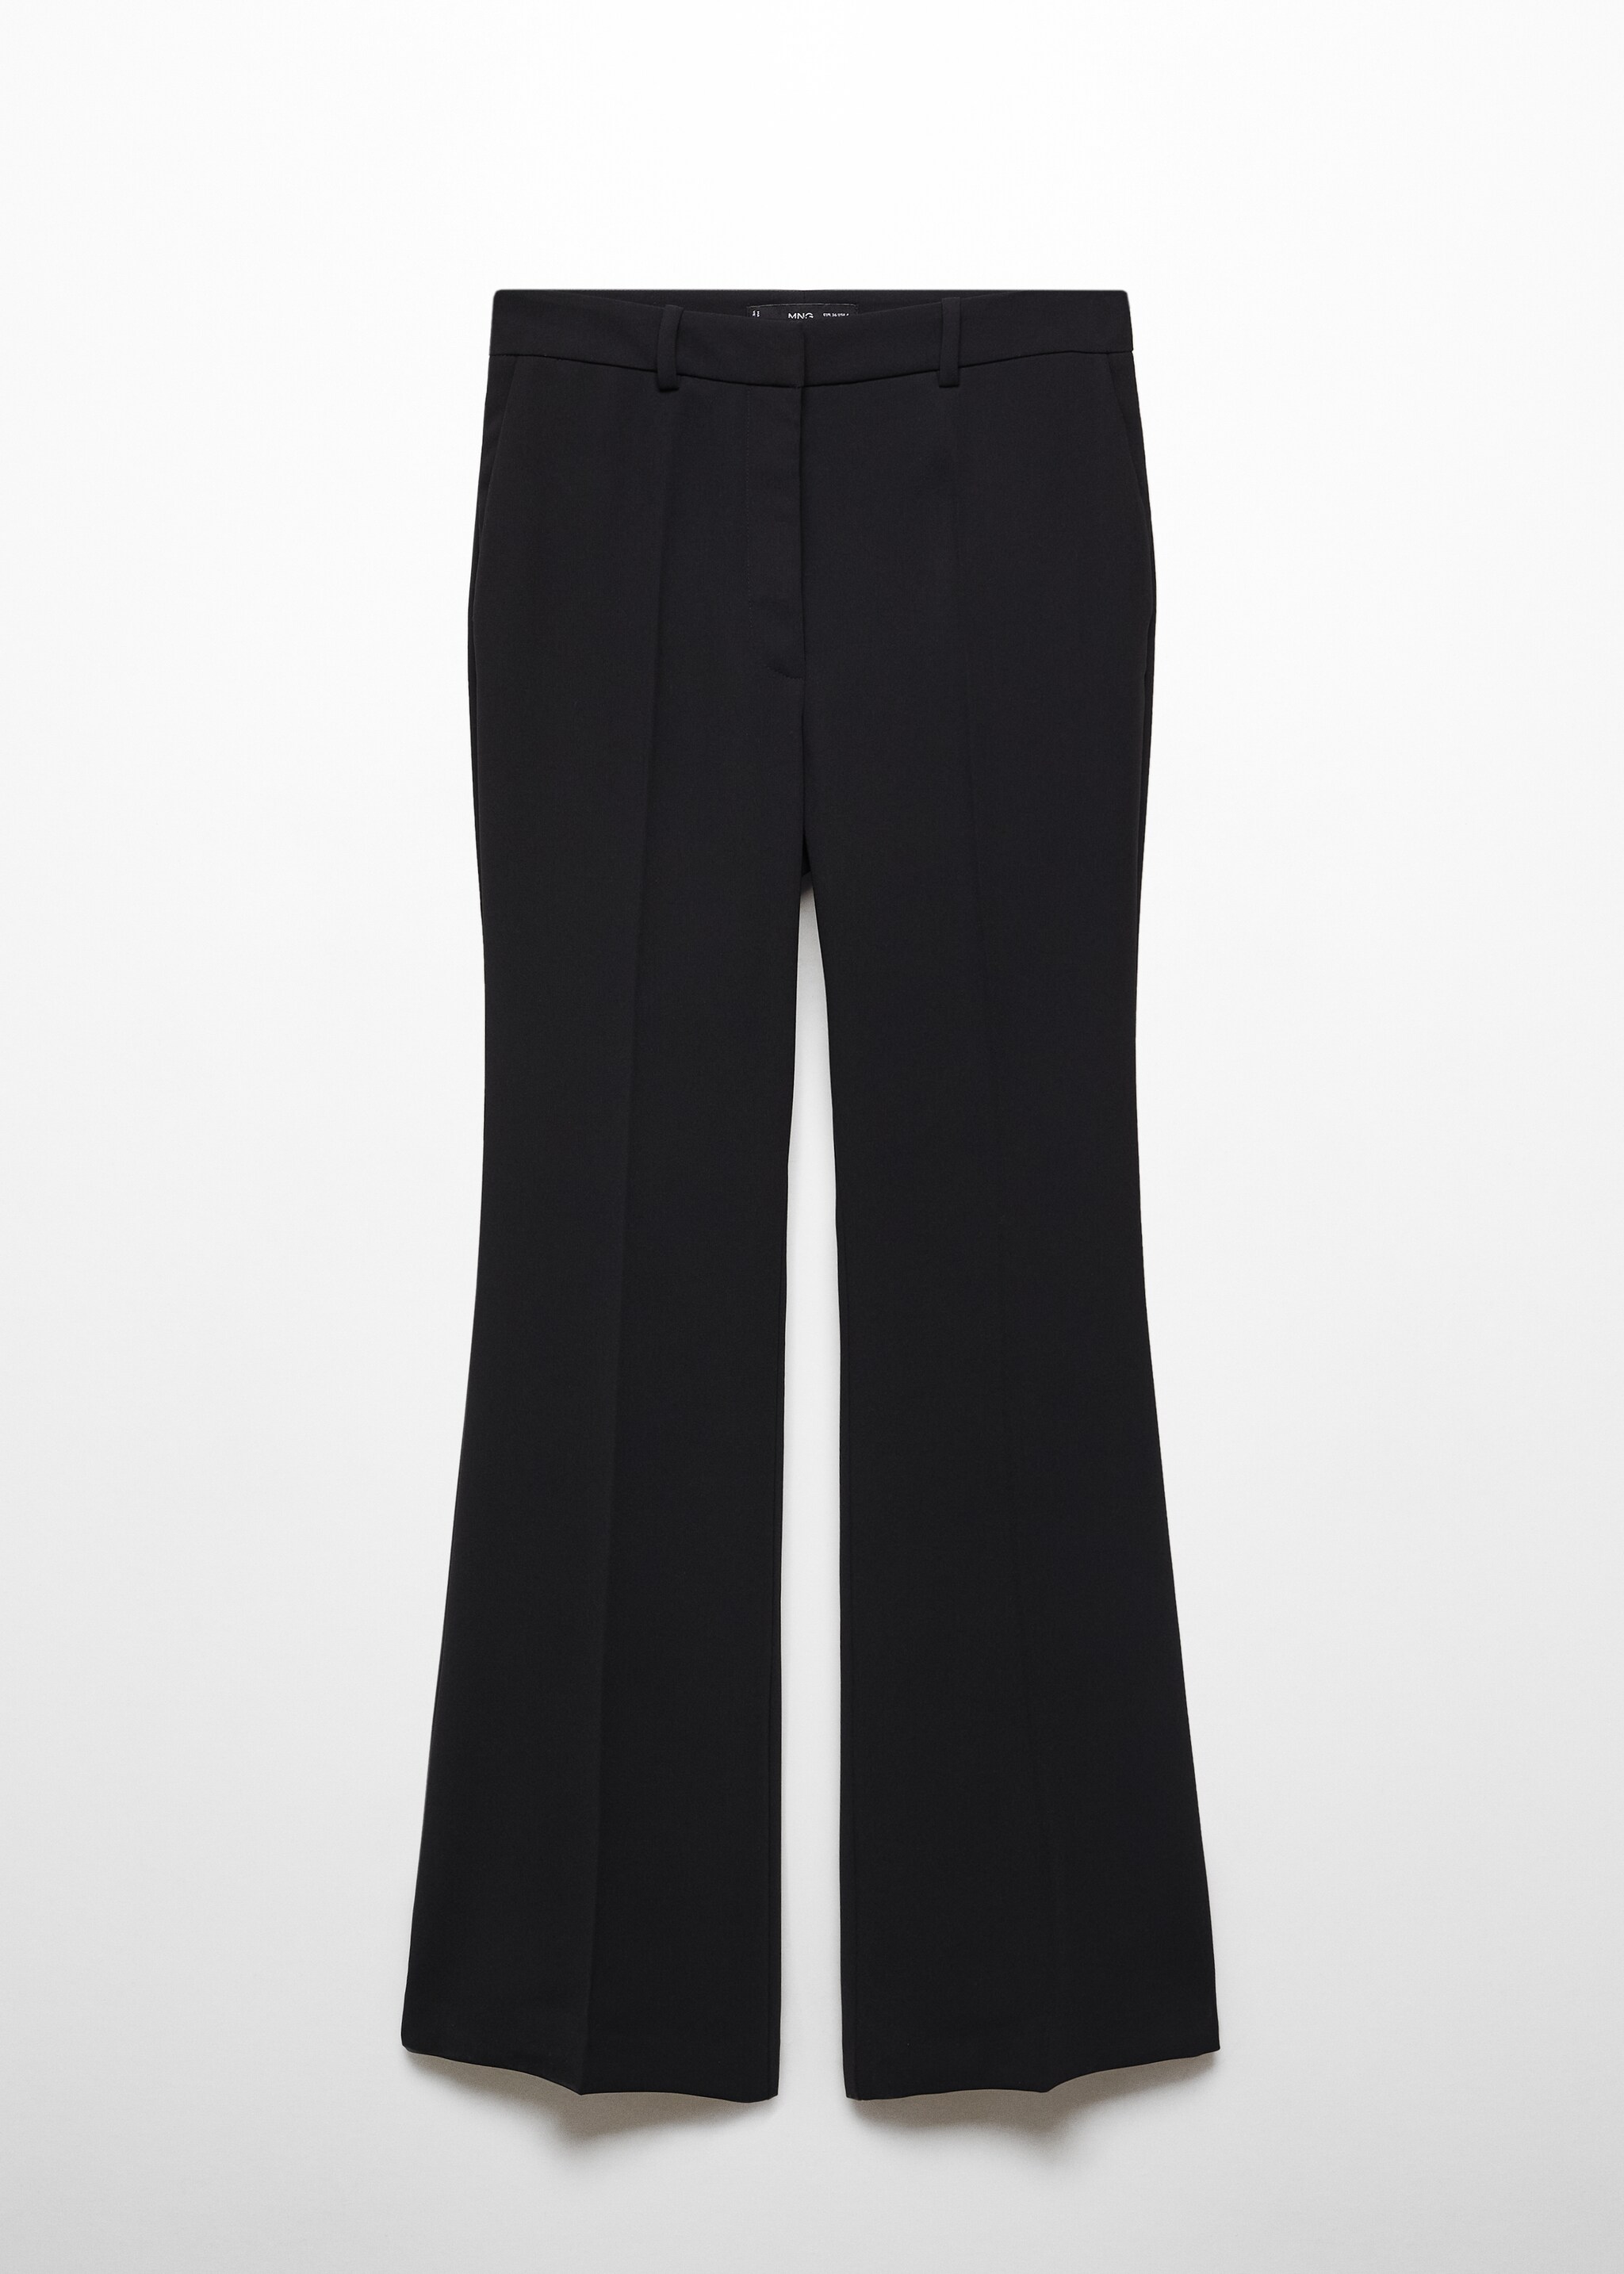 Flared trouser suit - Article without model